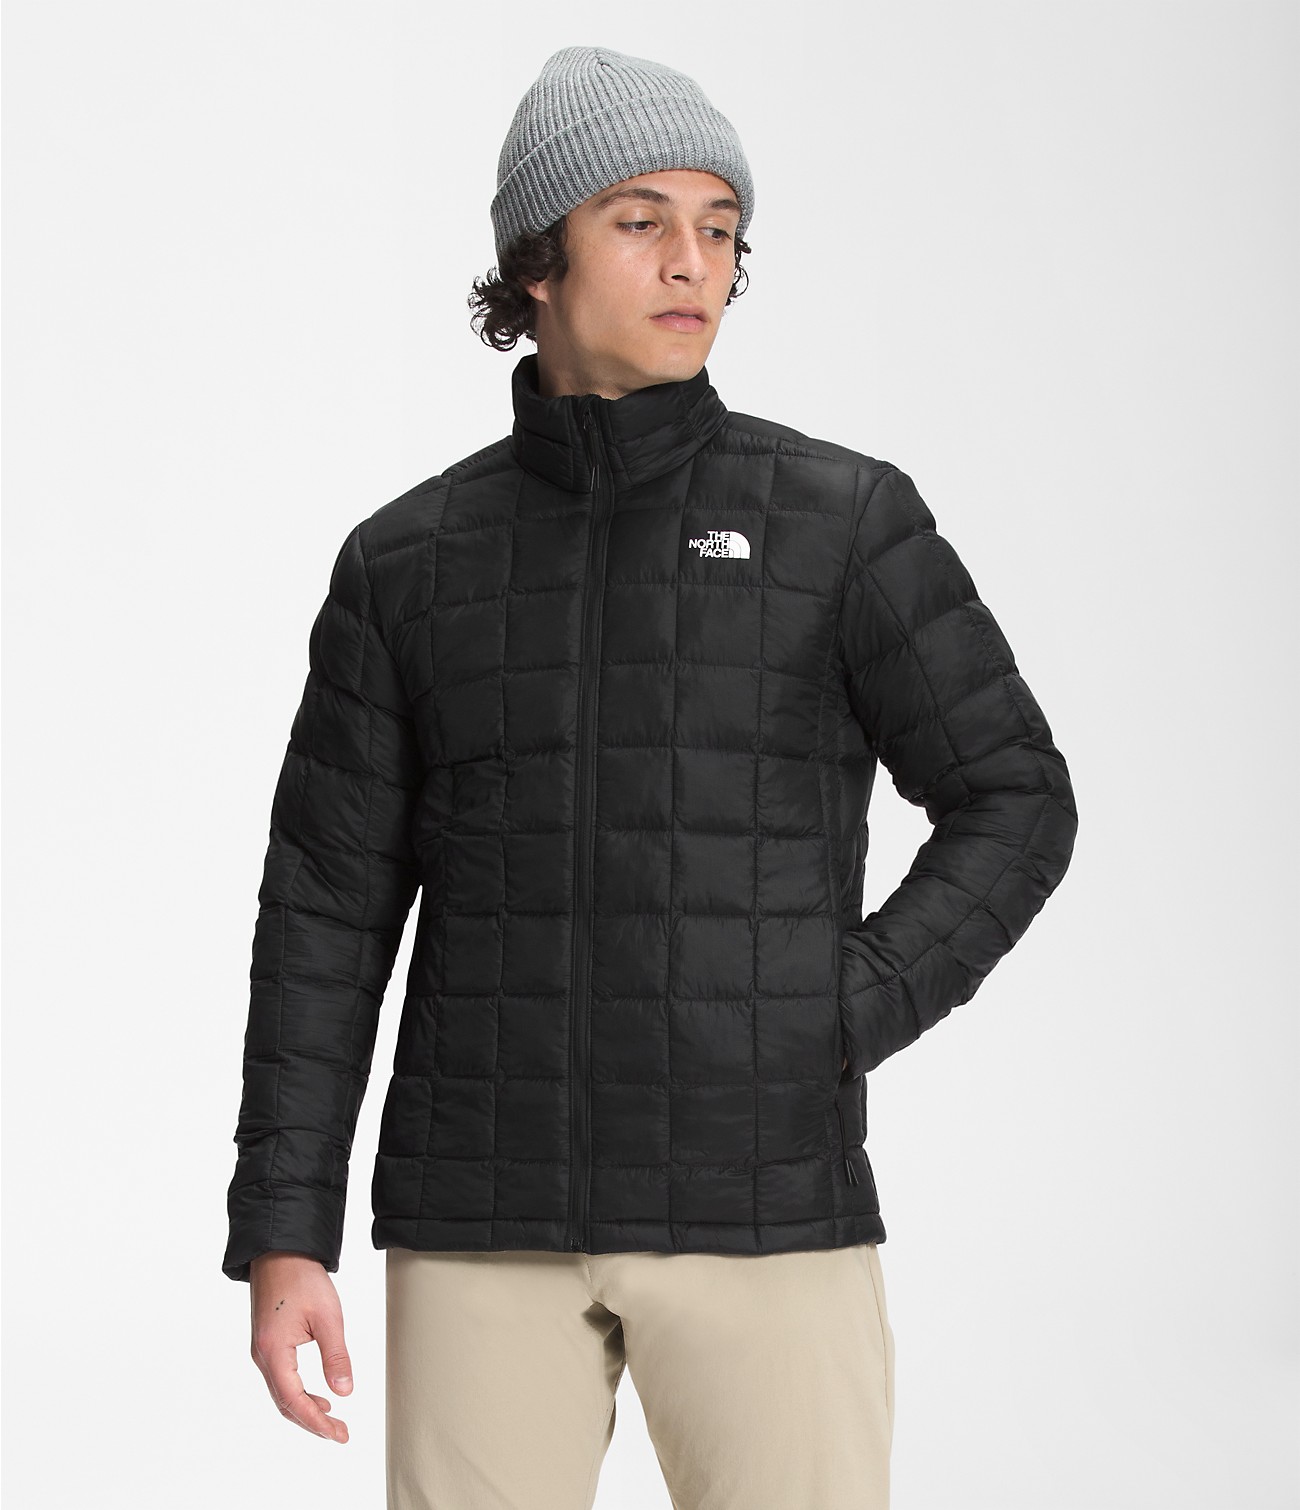 Unlock Wilderness' choice in the Rab Vs North Face comparison, the ThermoBall™ Eco Jacket 2.0 by The North Face